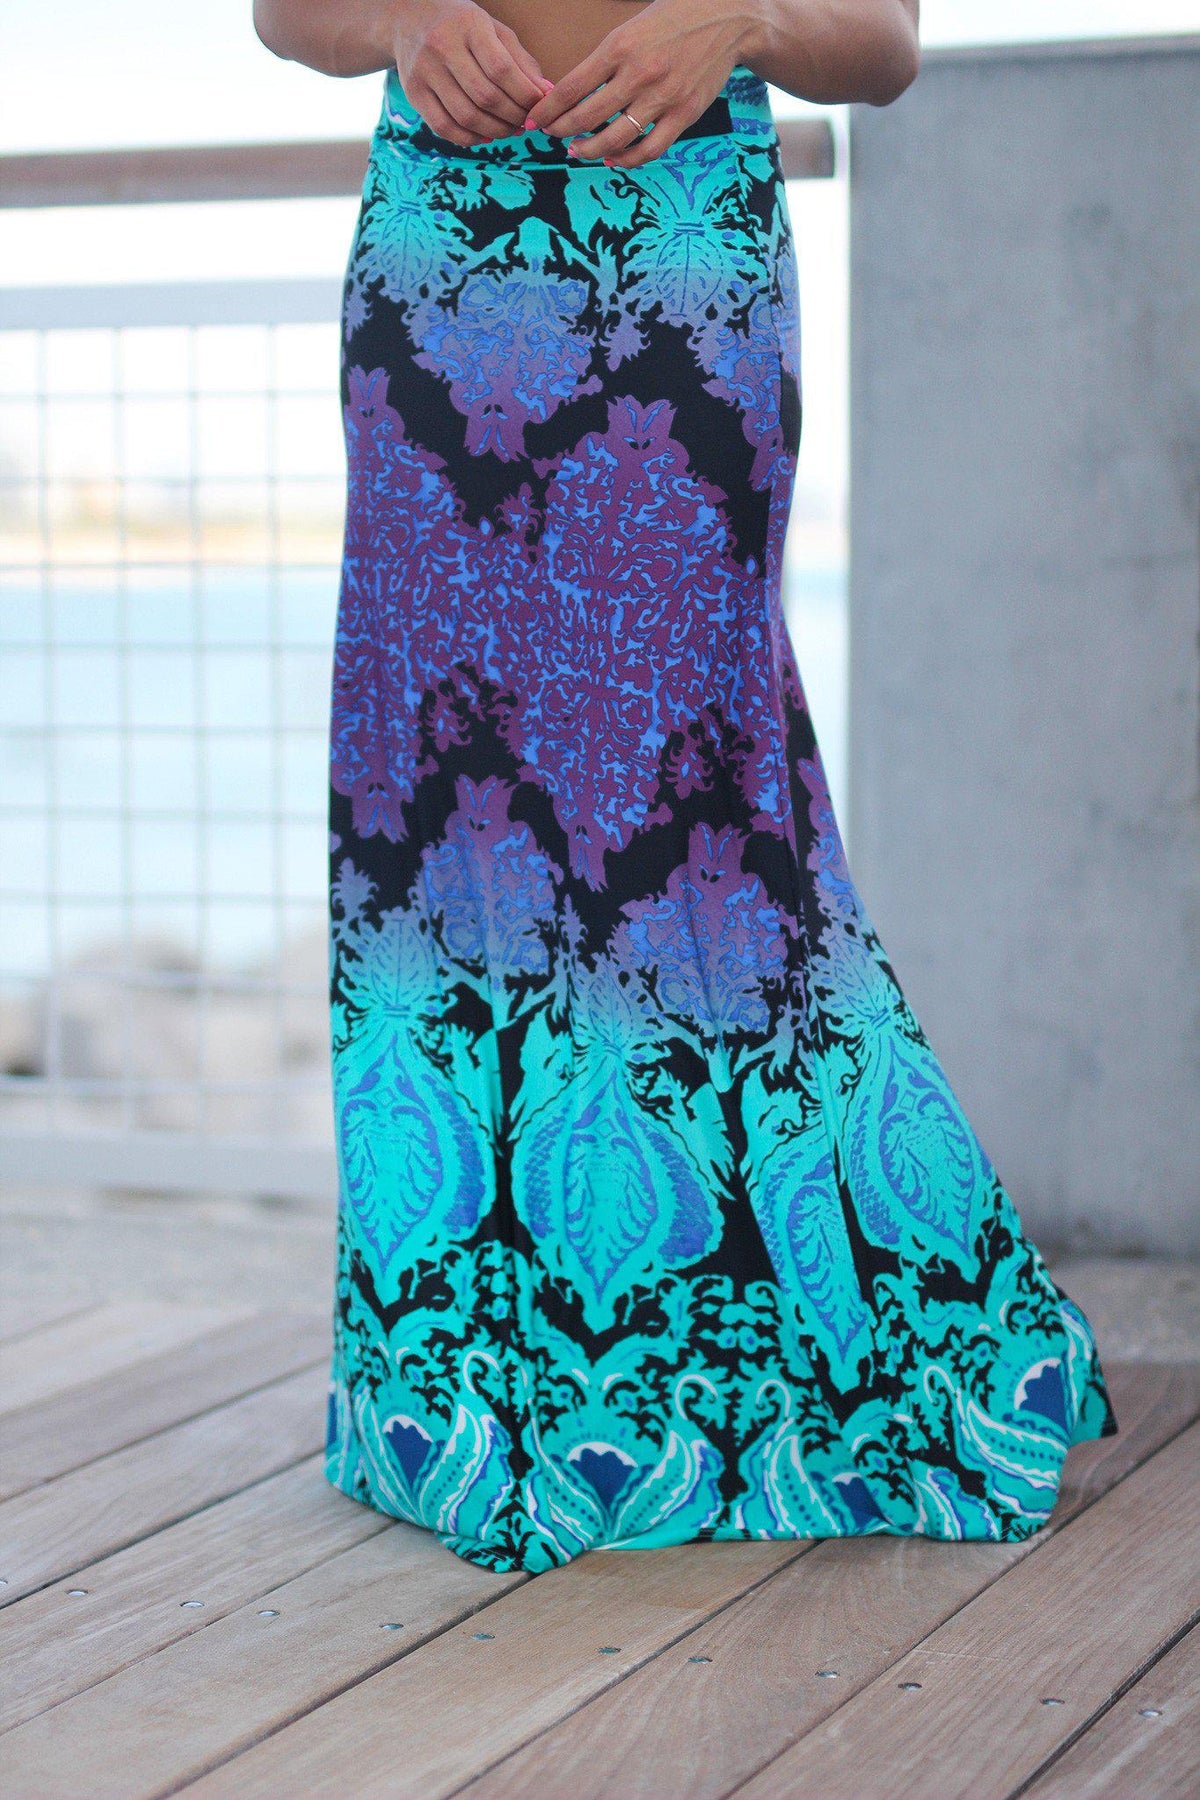 Aqua Printed Maxi Skirt | Online Boutiques – Saved by the Dress